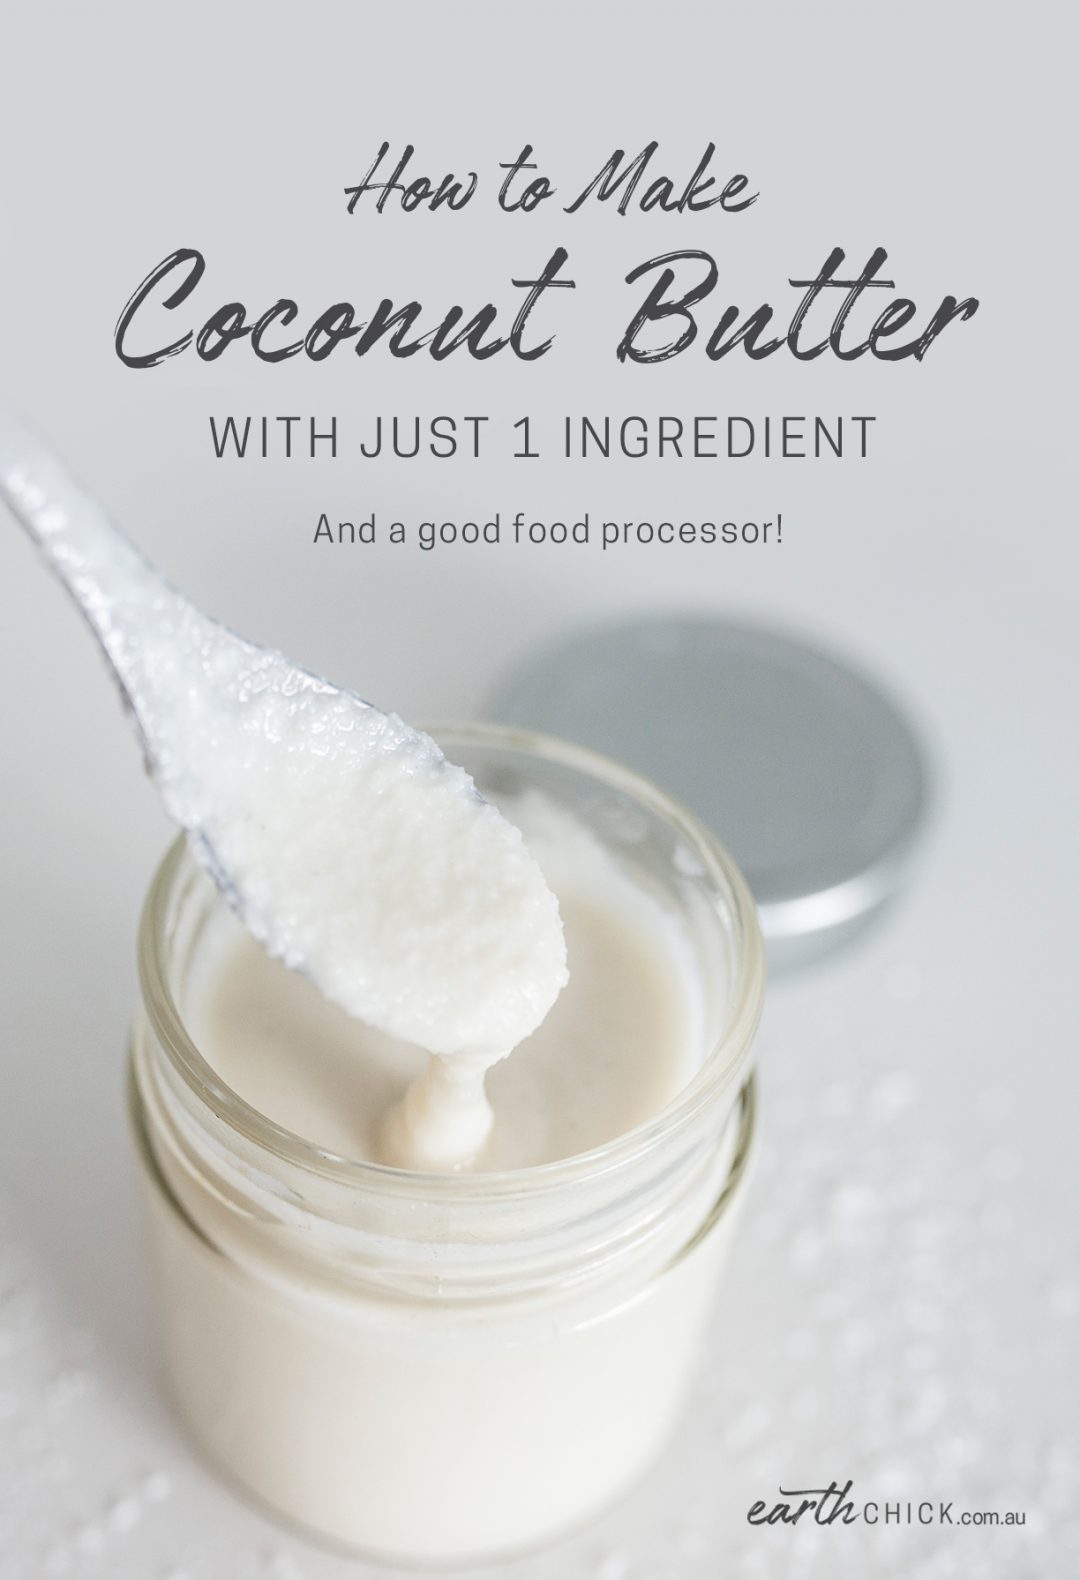 How to Make Coconut Butter - Delicious Homemade Recipe - Earth Chick